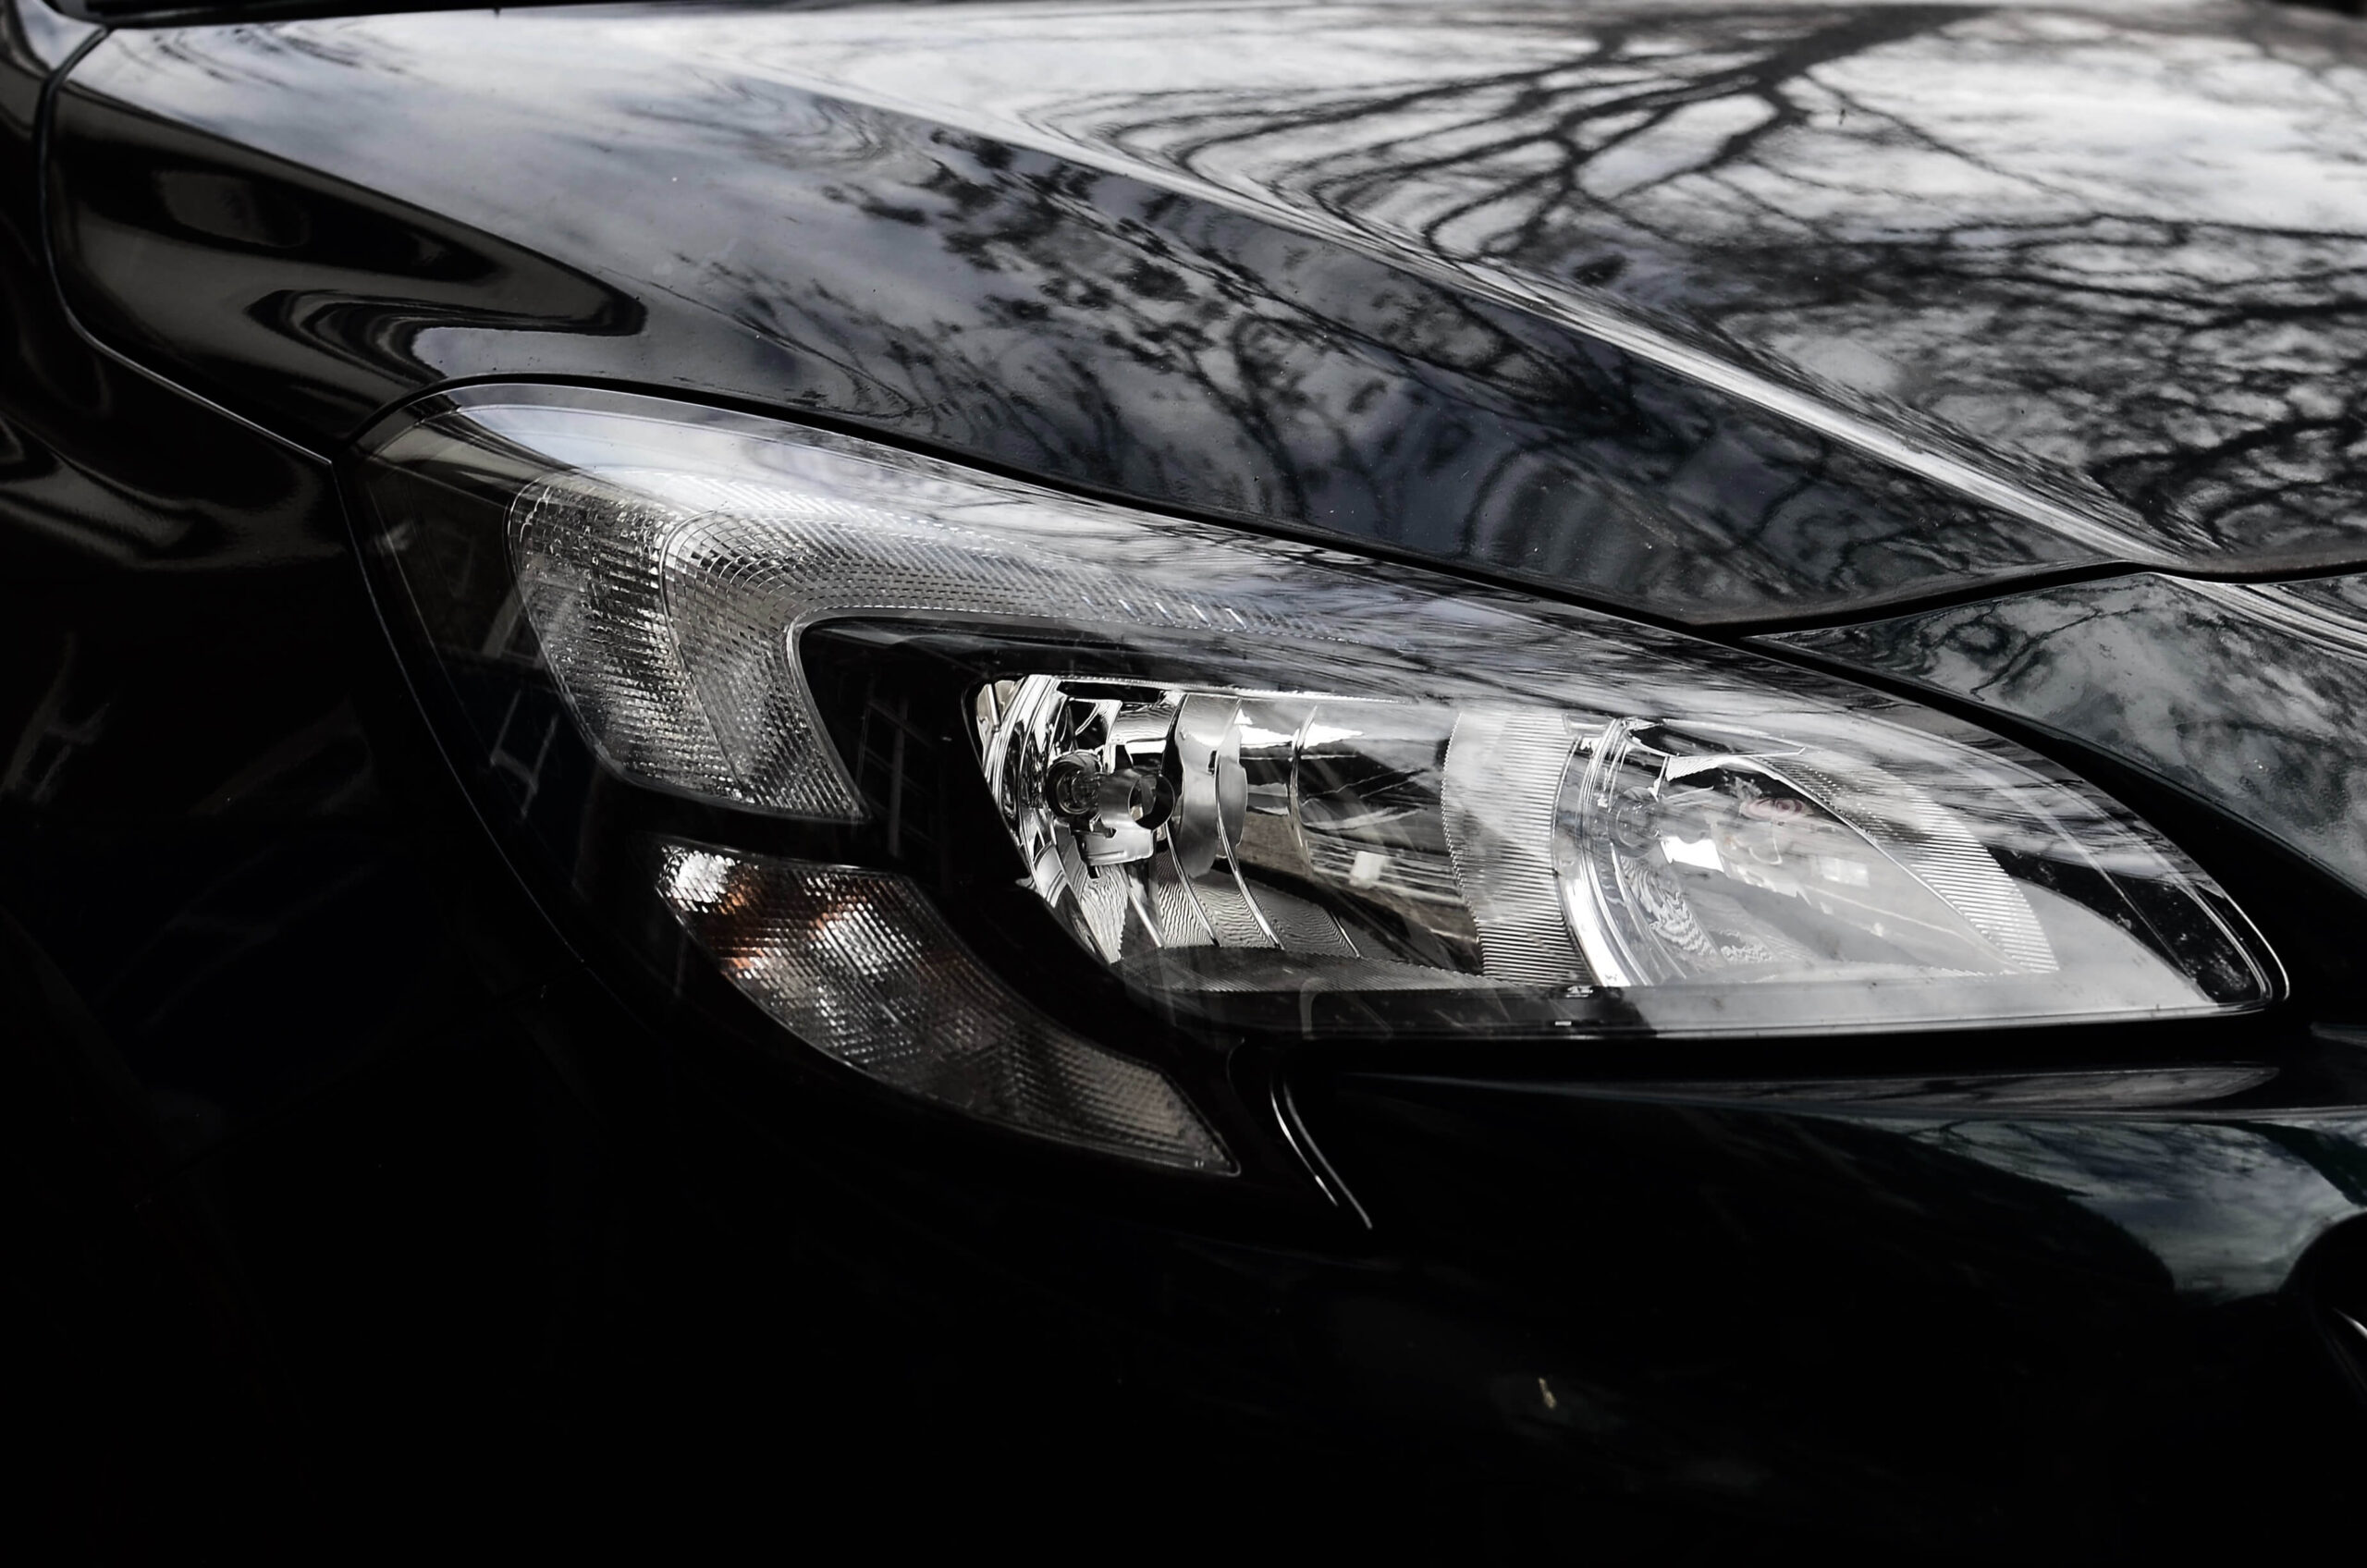 ow to use T-Cut to get your car’s glossy finish looking like new